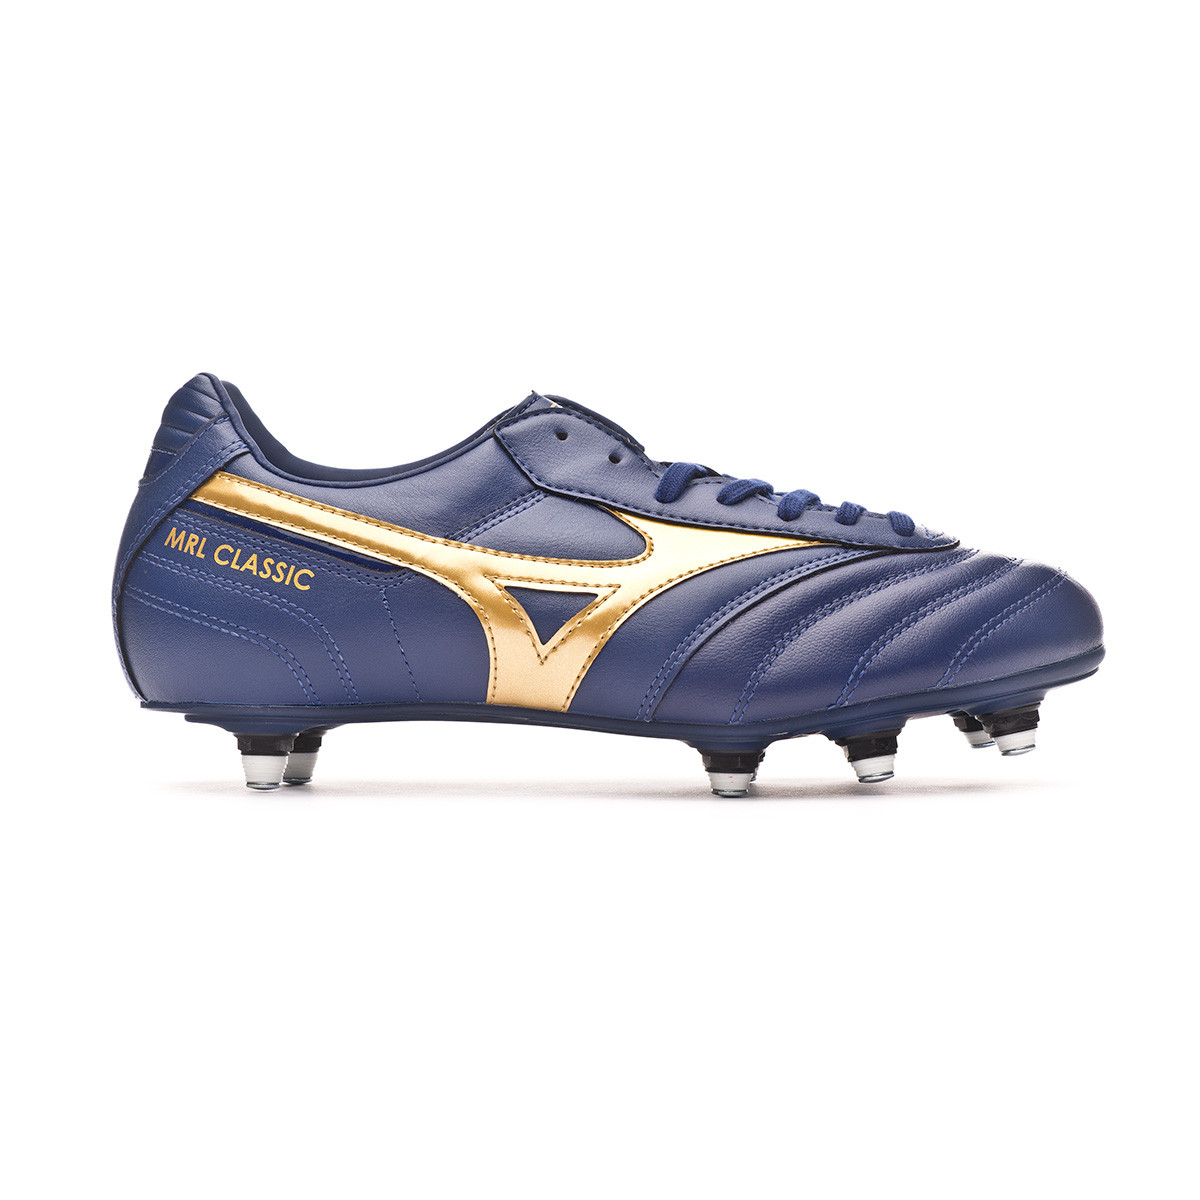 blue and gold football cleats